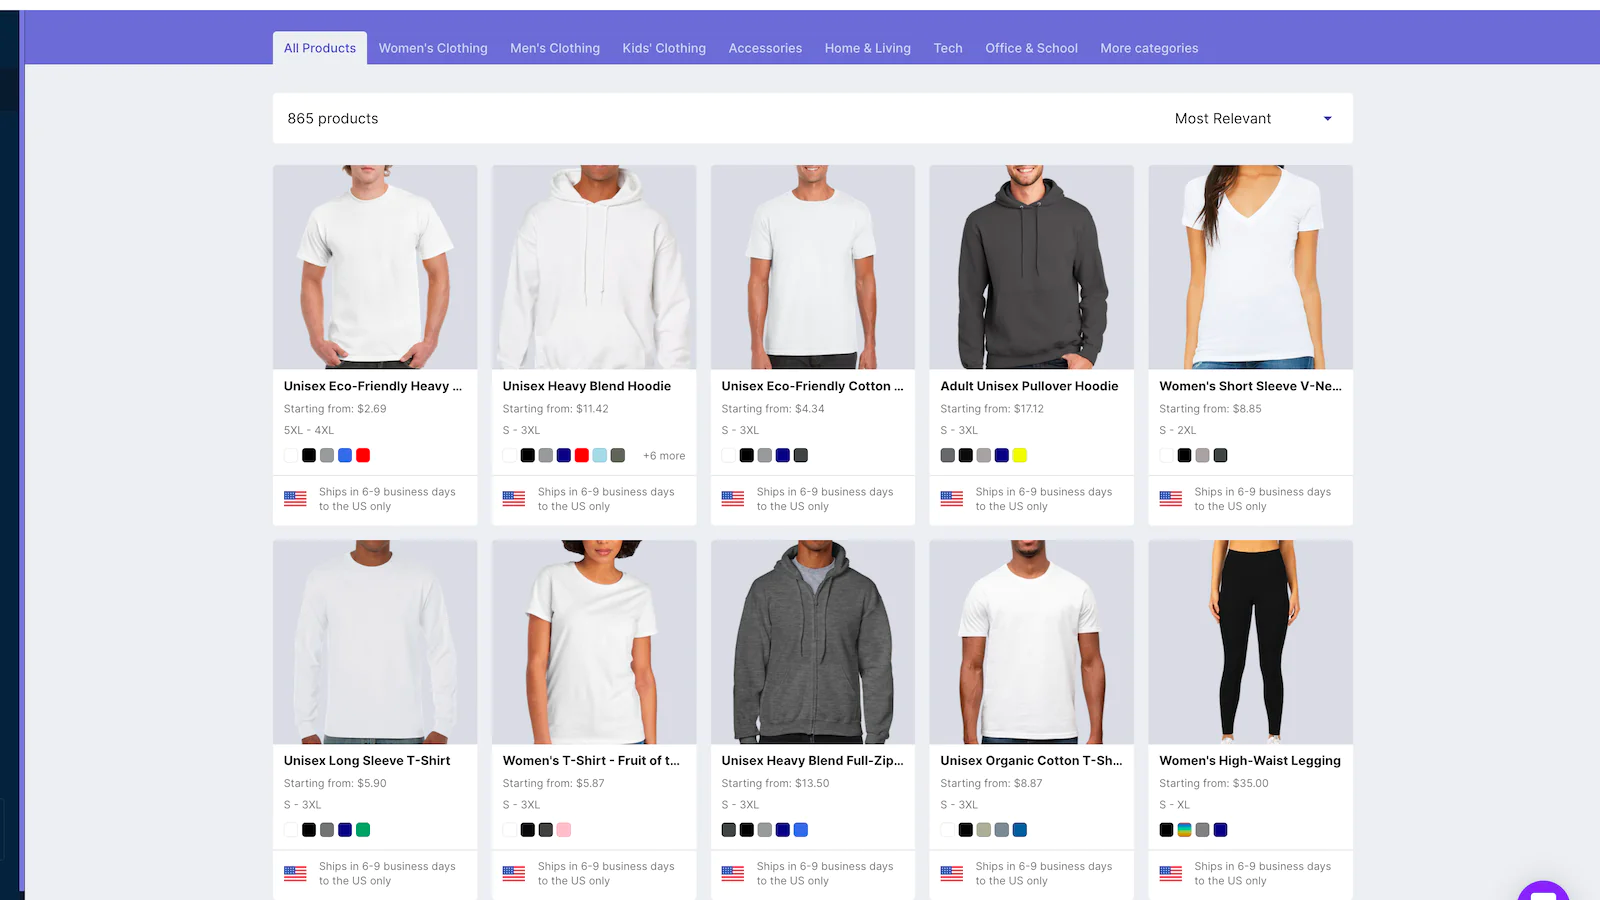 Product listings for men’s and women’s T-shirts and hoodies in white and gray colorways.